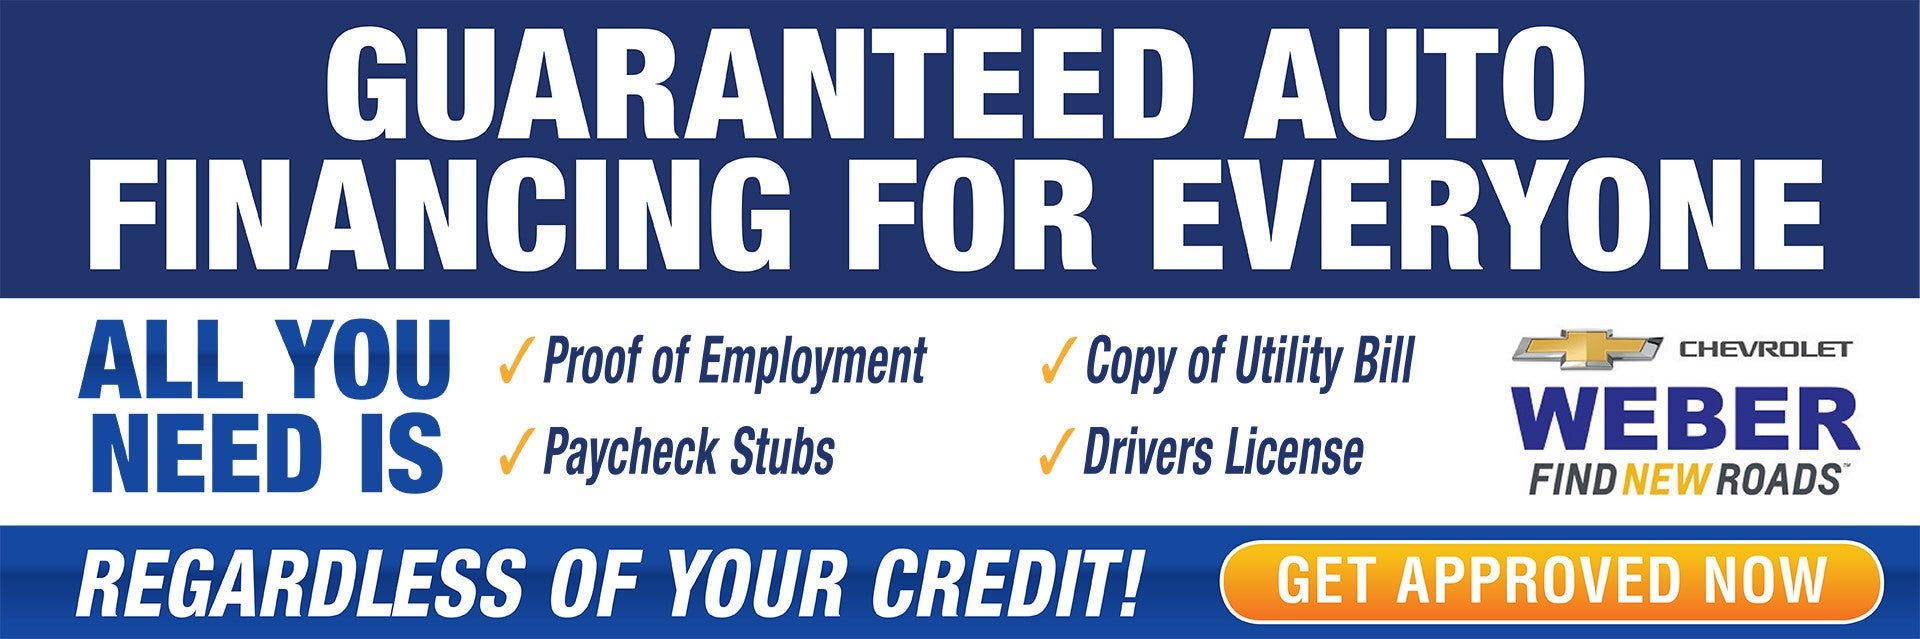 Guaranteed Auto Financing for Everyone at Weber Chevrolet in St. Louis MO